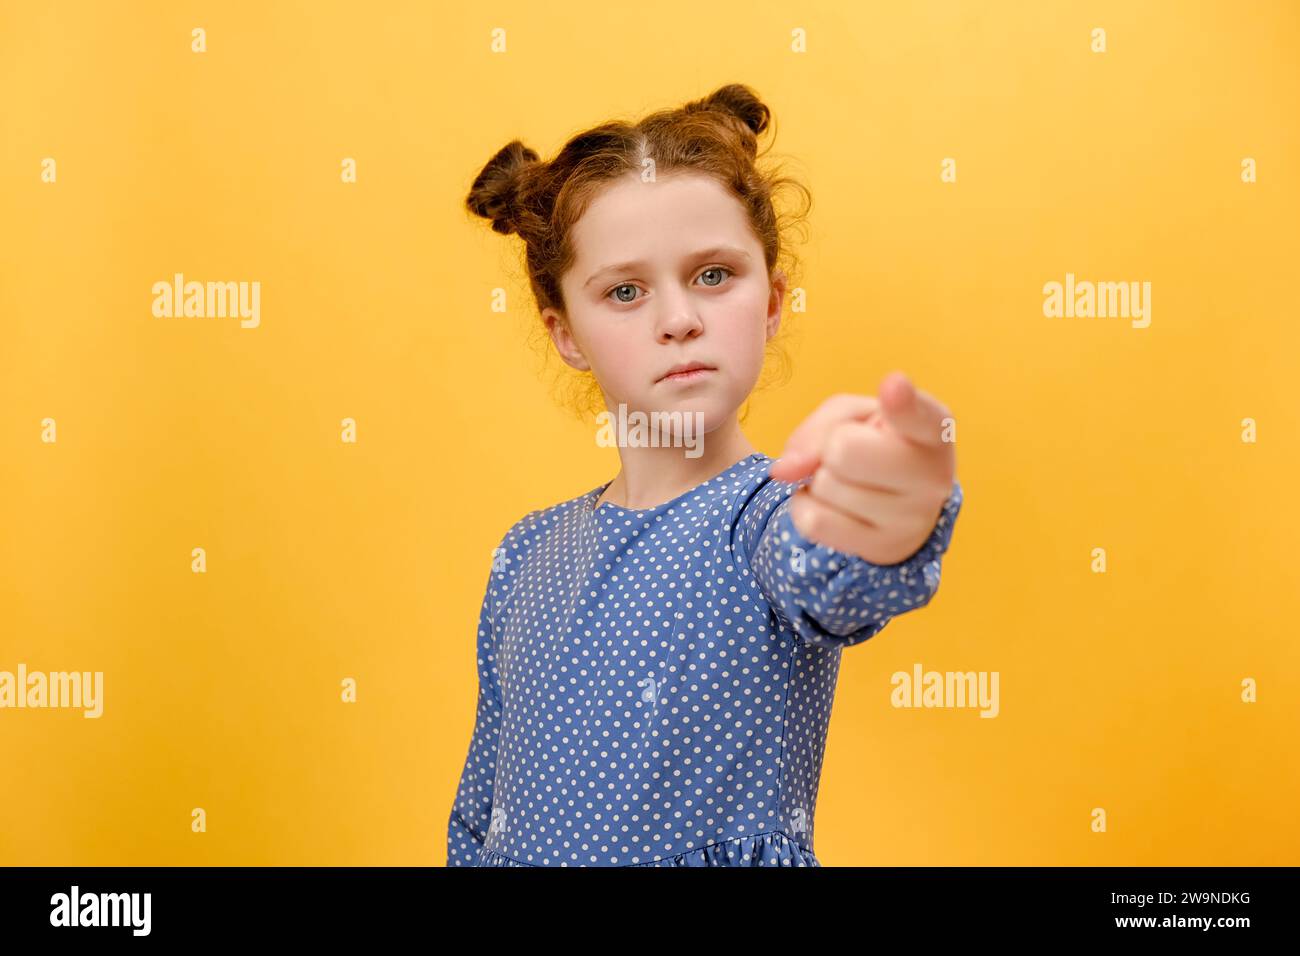 Portrait of serious little caucasian girl child pointing at camera, looking angry, making choice, choosing guilty, posing isolated over plain yellow c Stock Photo